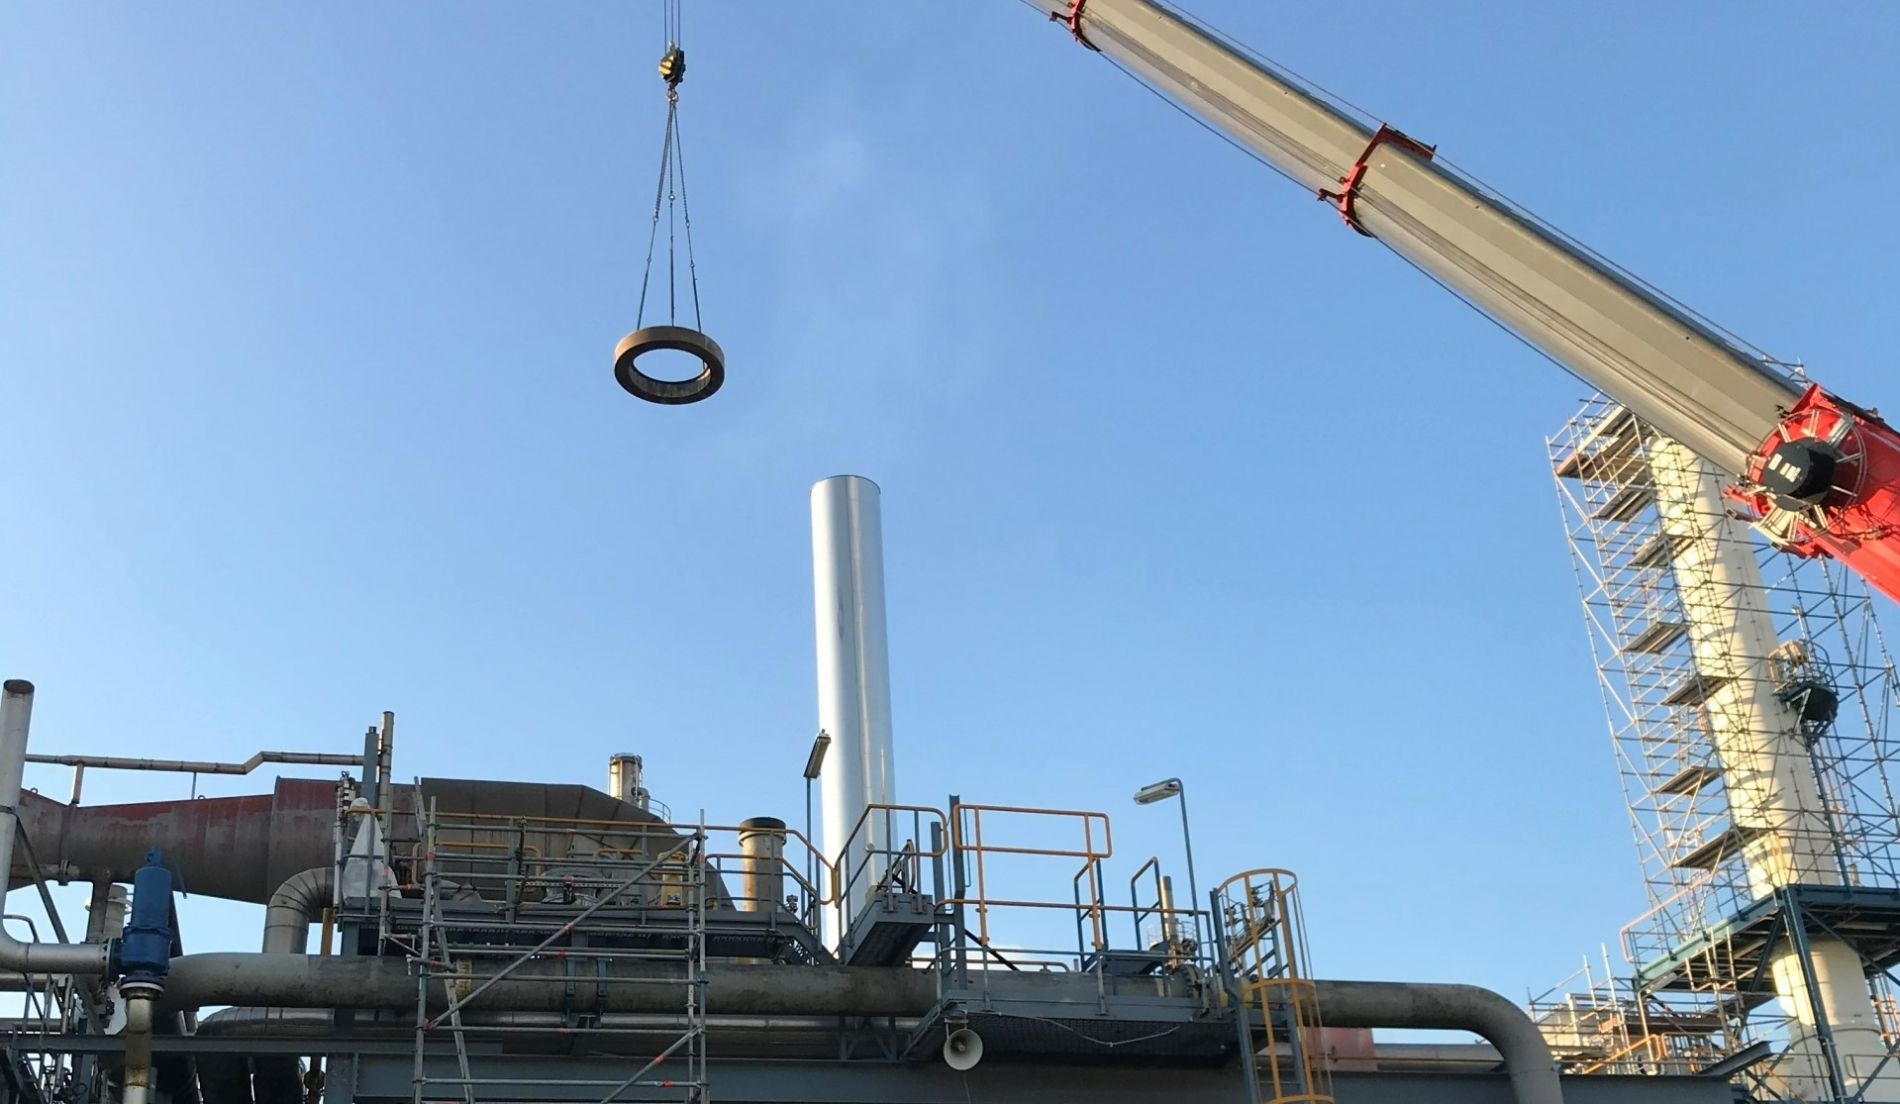 lifting and placement of the flue gas stack